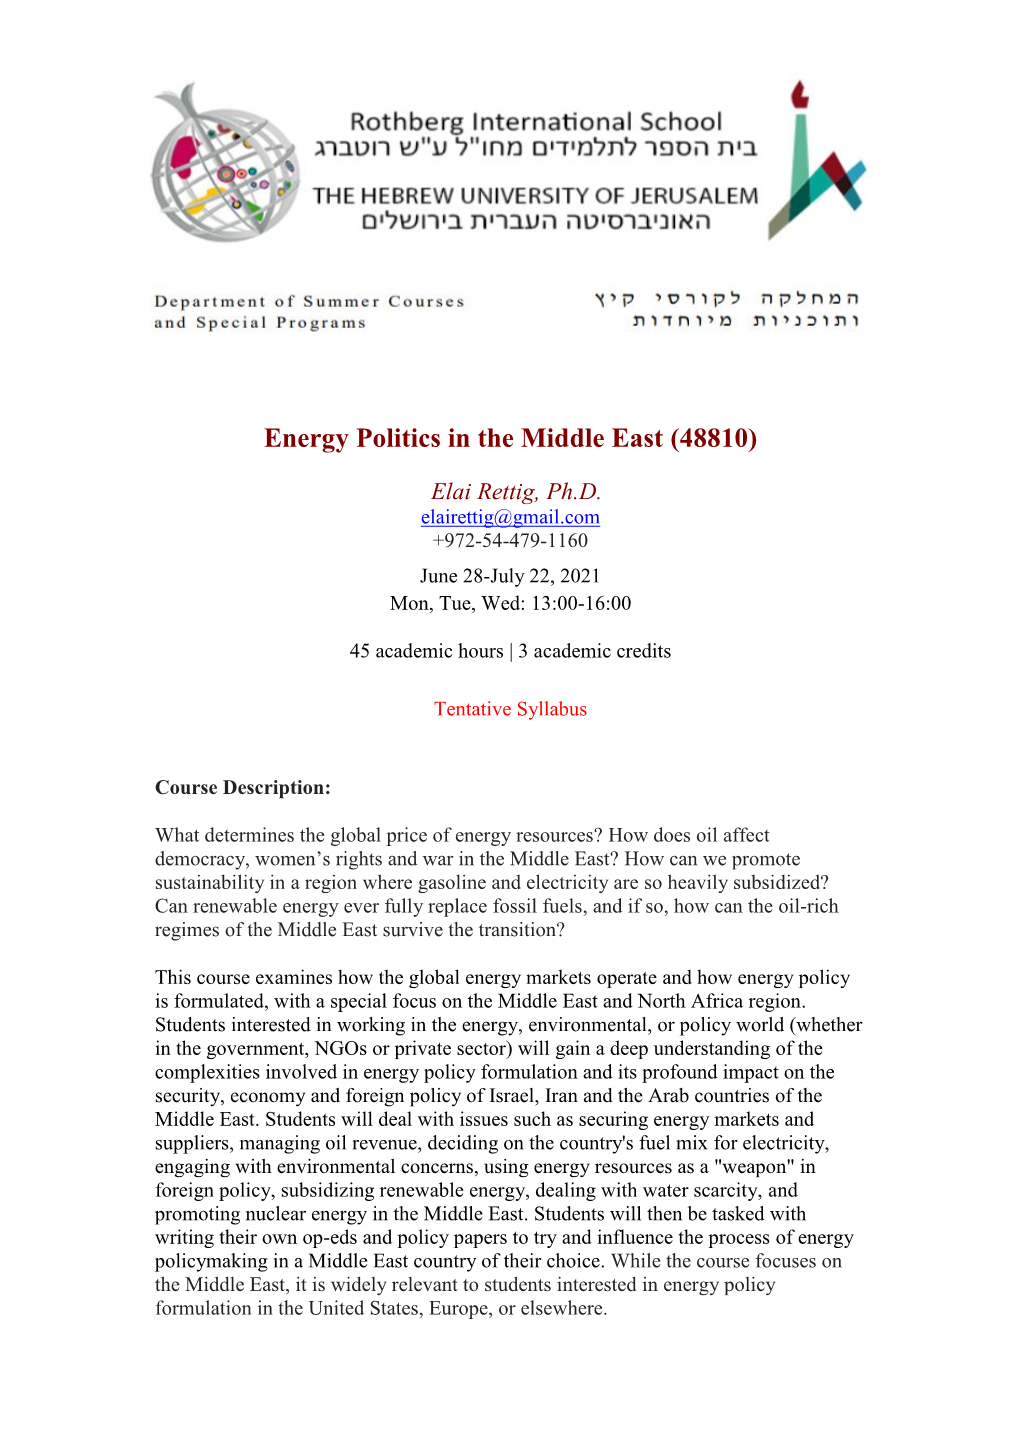 Energy Politics in the Middle East (48810)